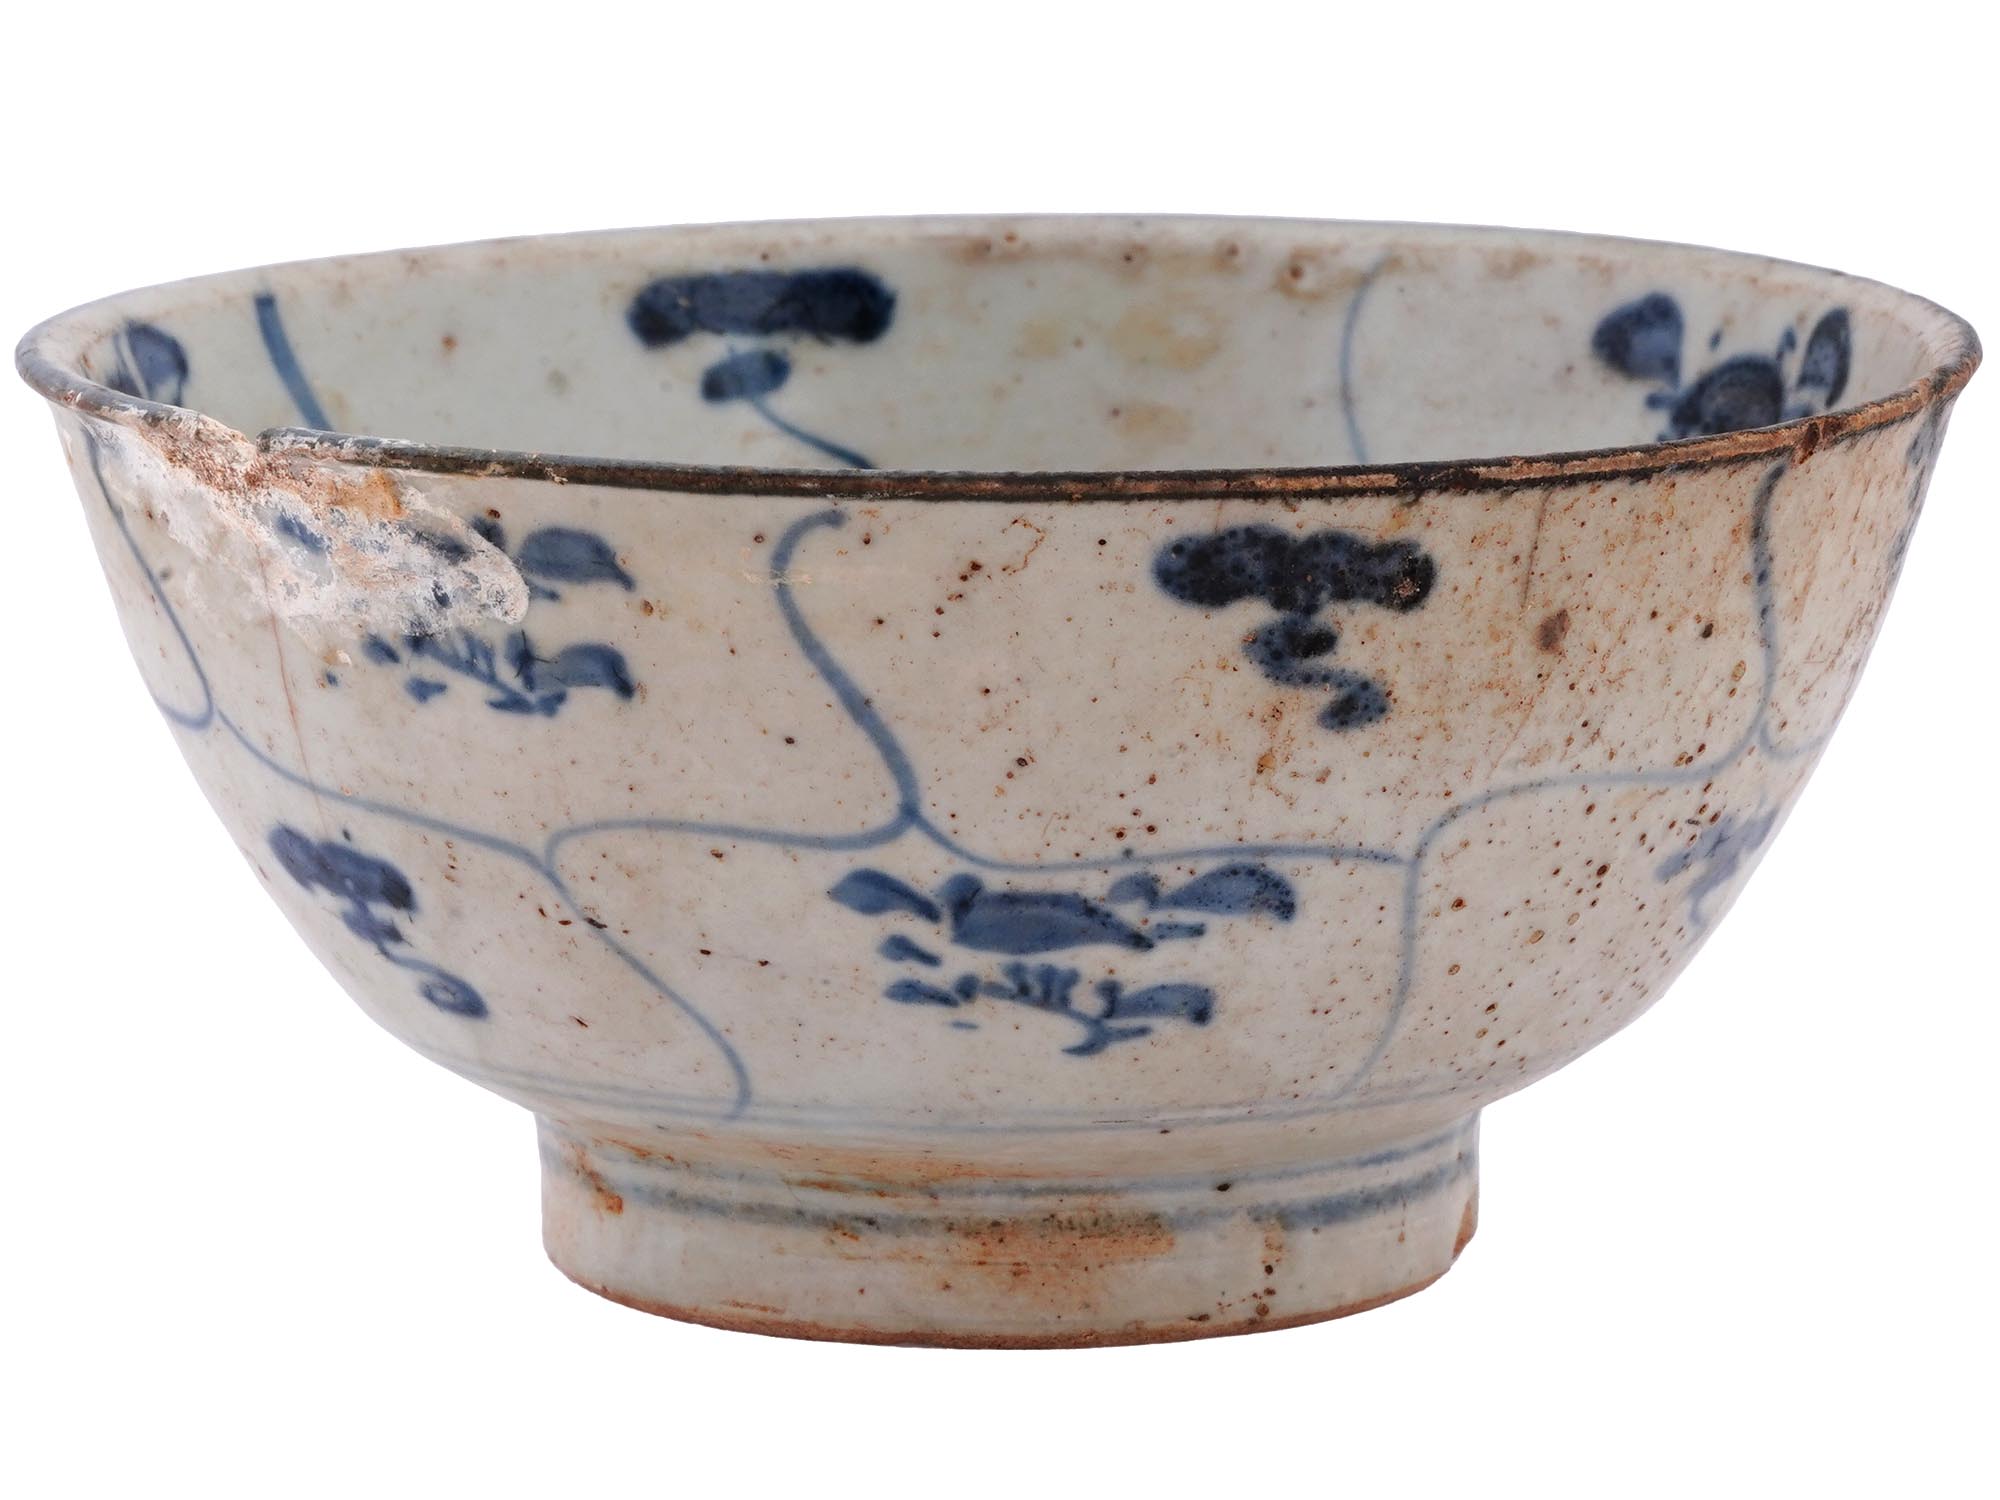 ANTIQUE CHINESE MING DYNASTY SWATOW CERAMIC BOWL PIC-0